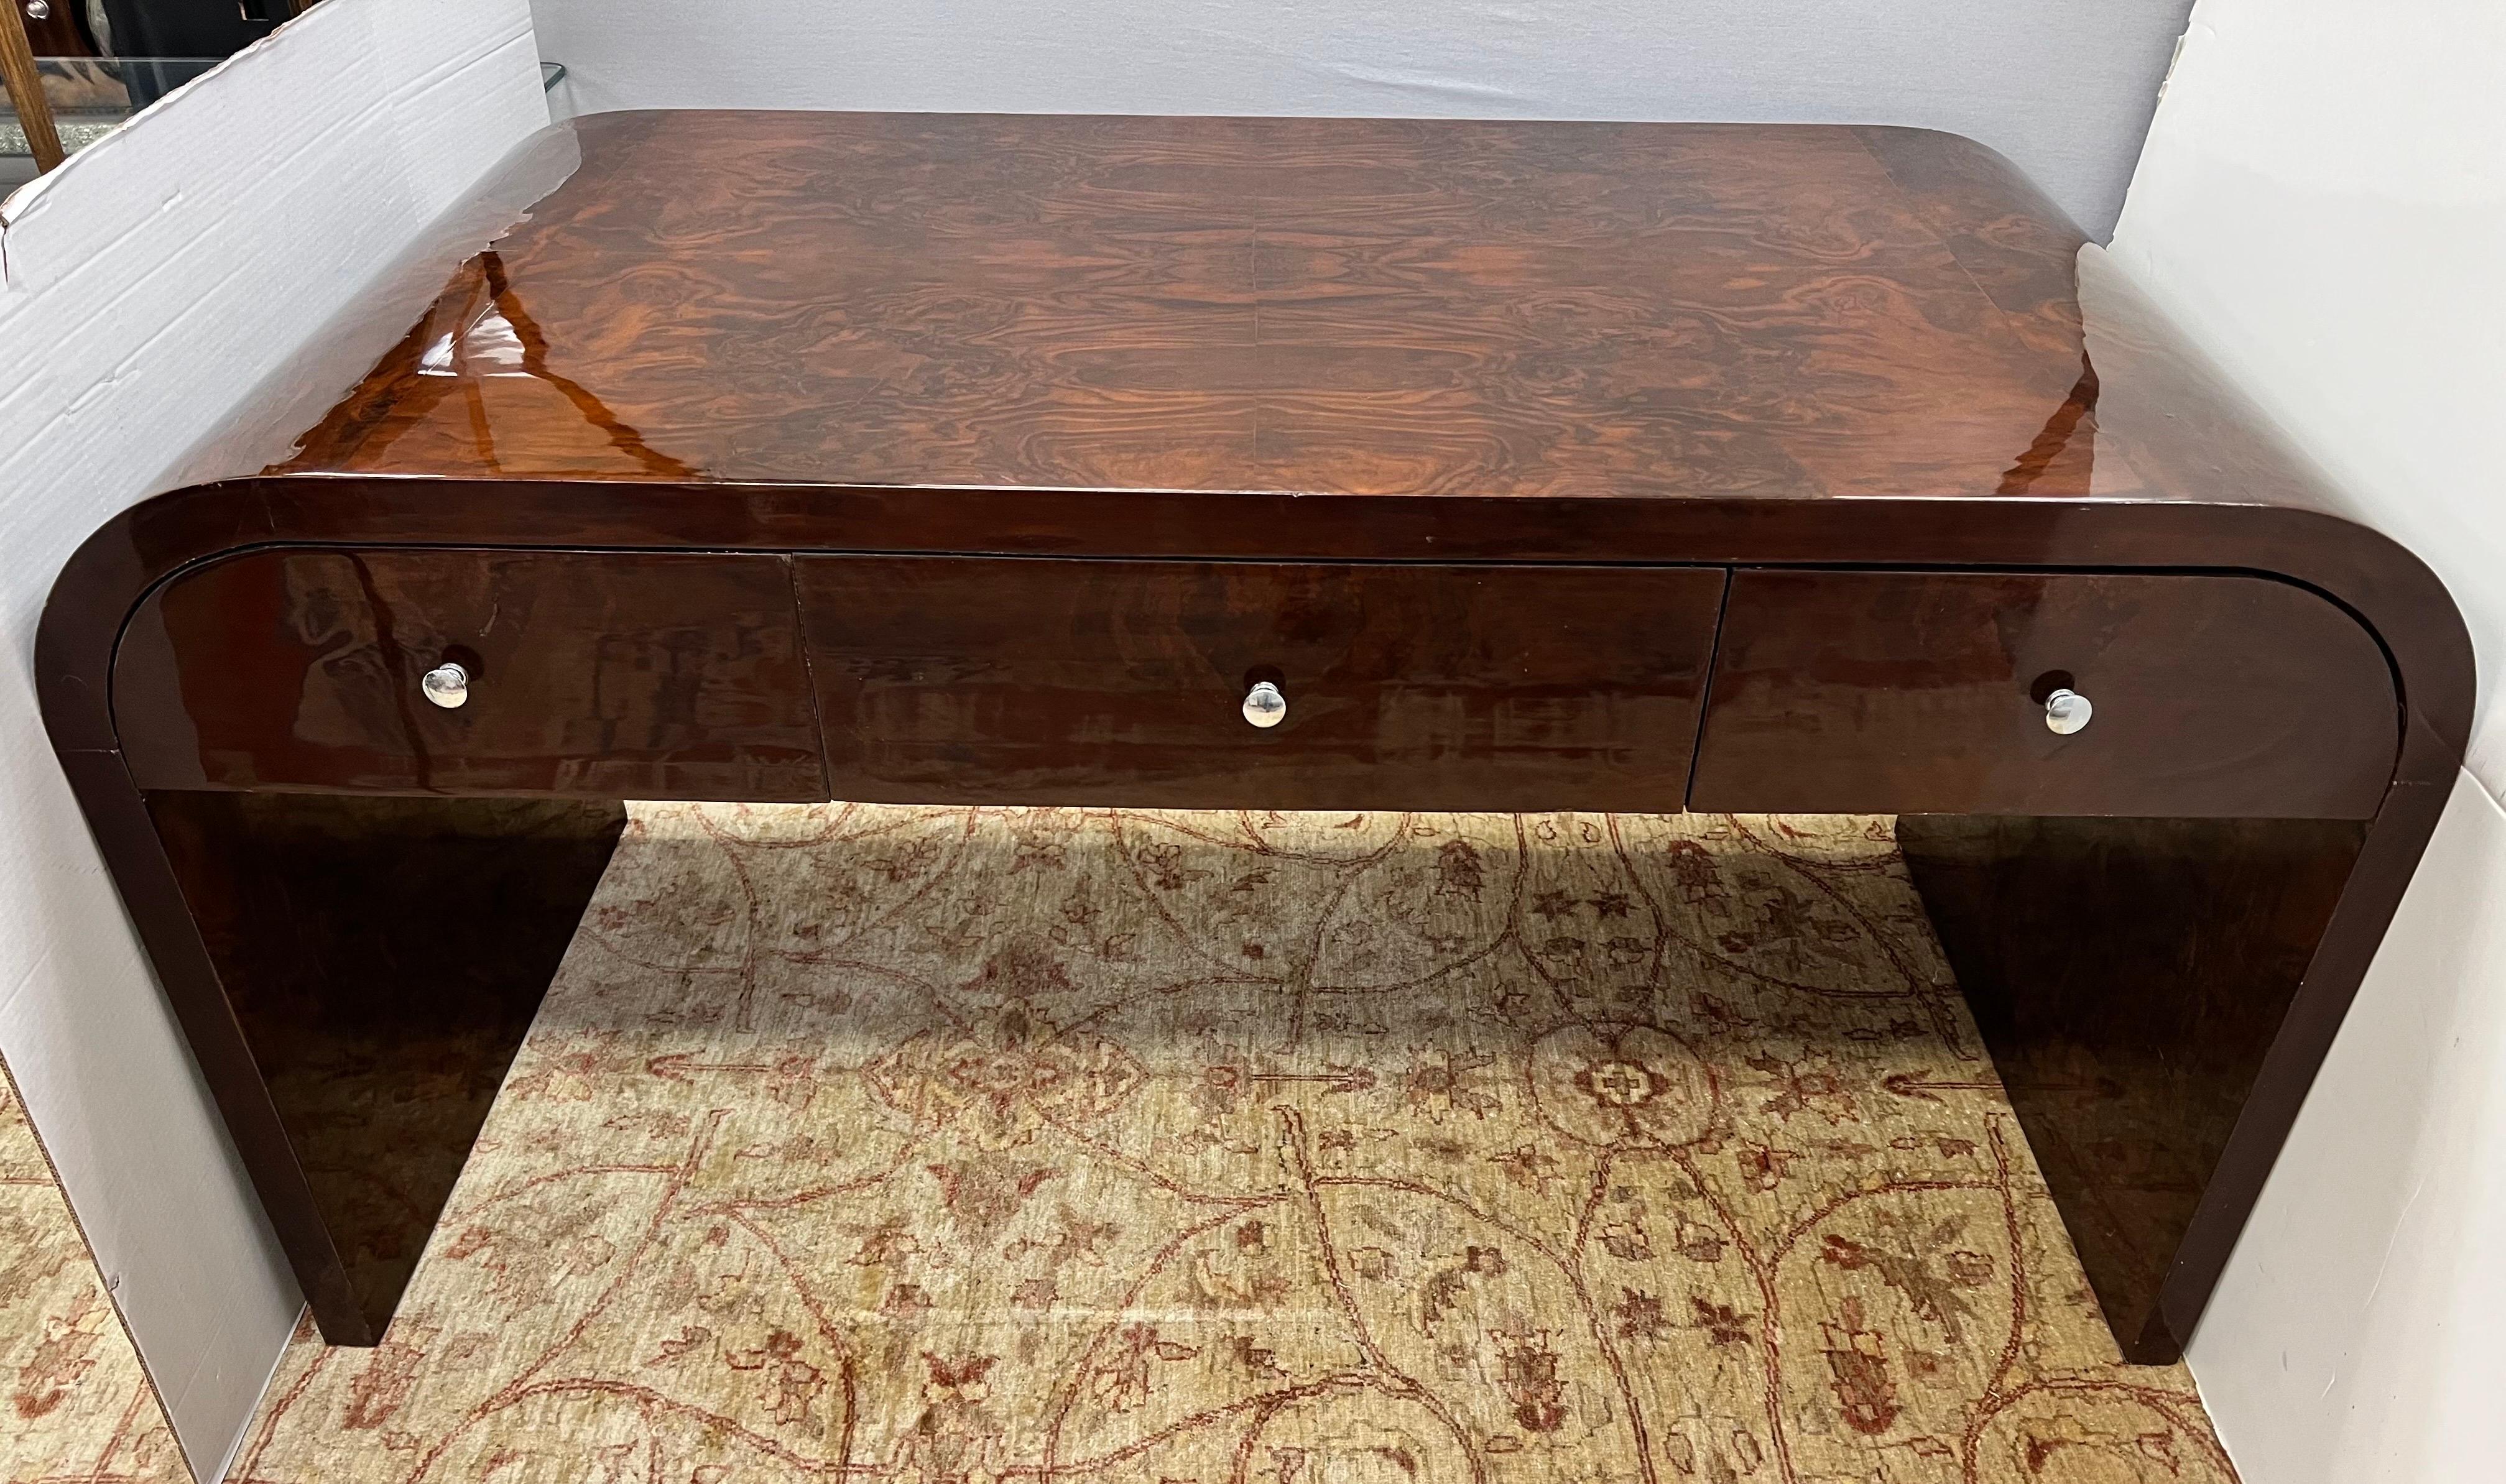 Sleek and sexy curved 20th Century Art Deco desk featuring coveted waterfall U-shape. Features three drawers at front. Great lines and better scale. Art Deco feel with a more modern, streamlined aesthetic.